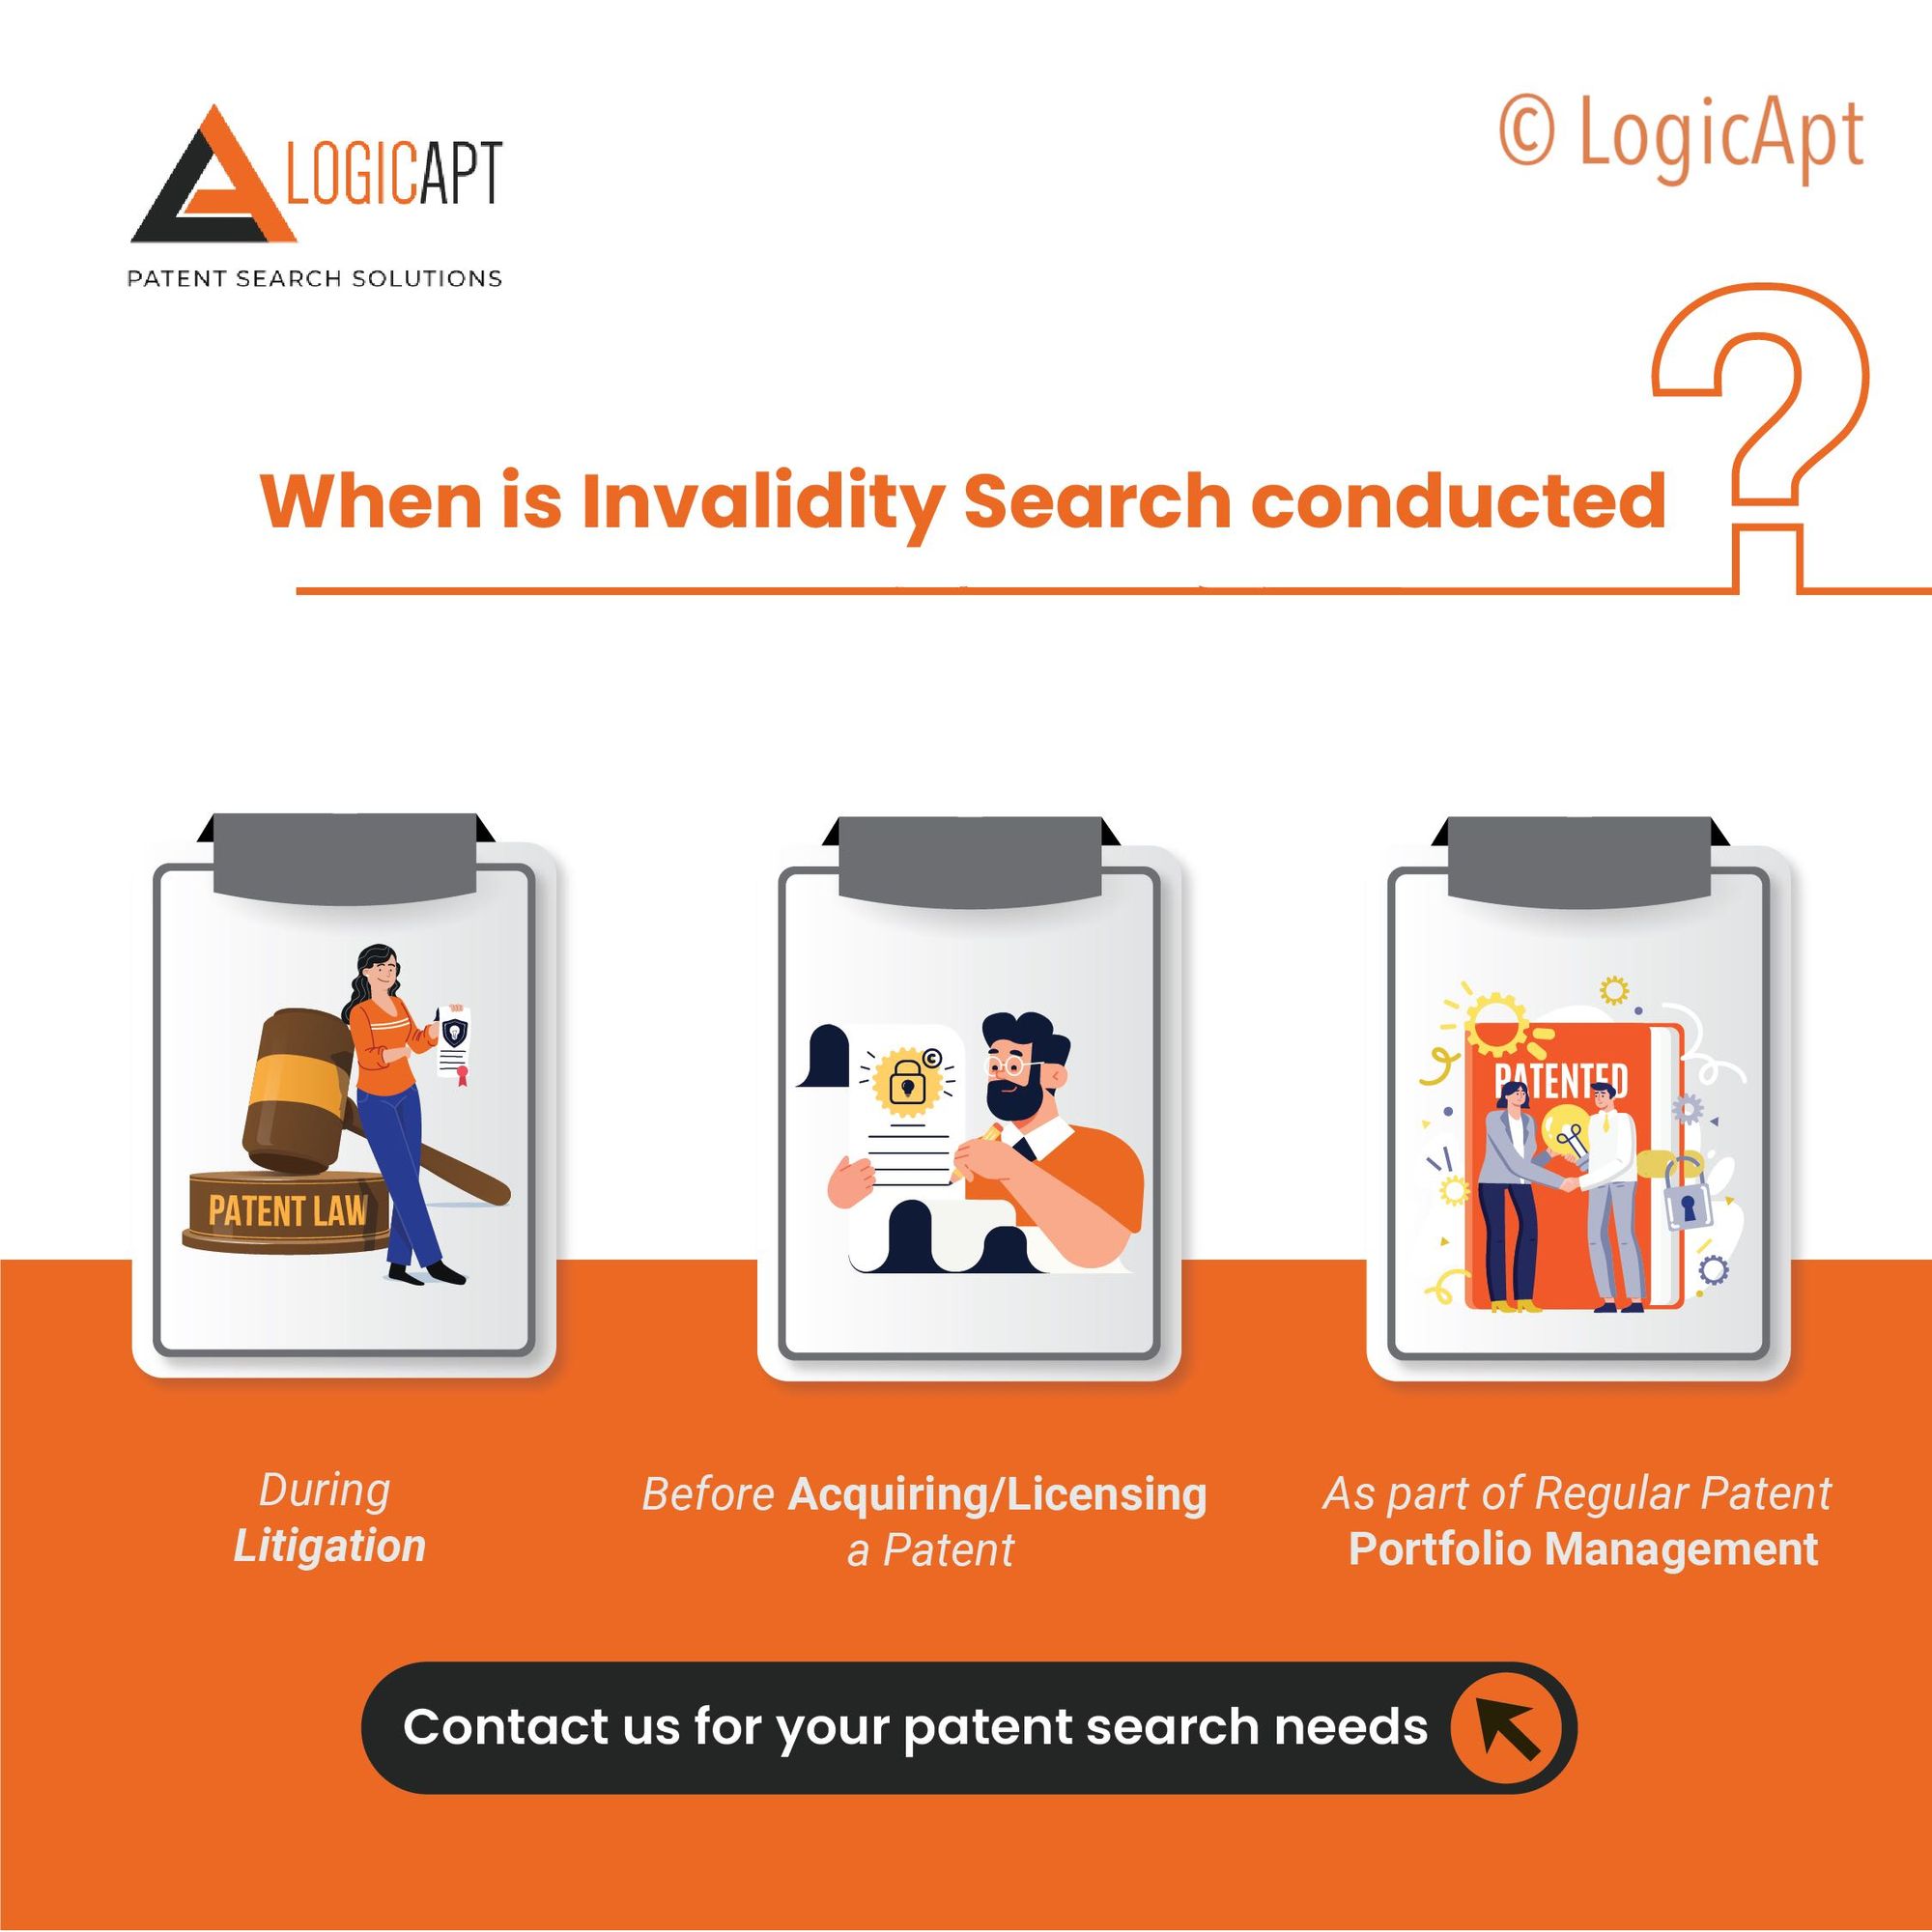 When is Invalidity Search conducted?